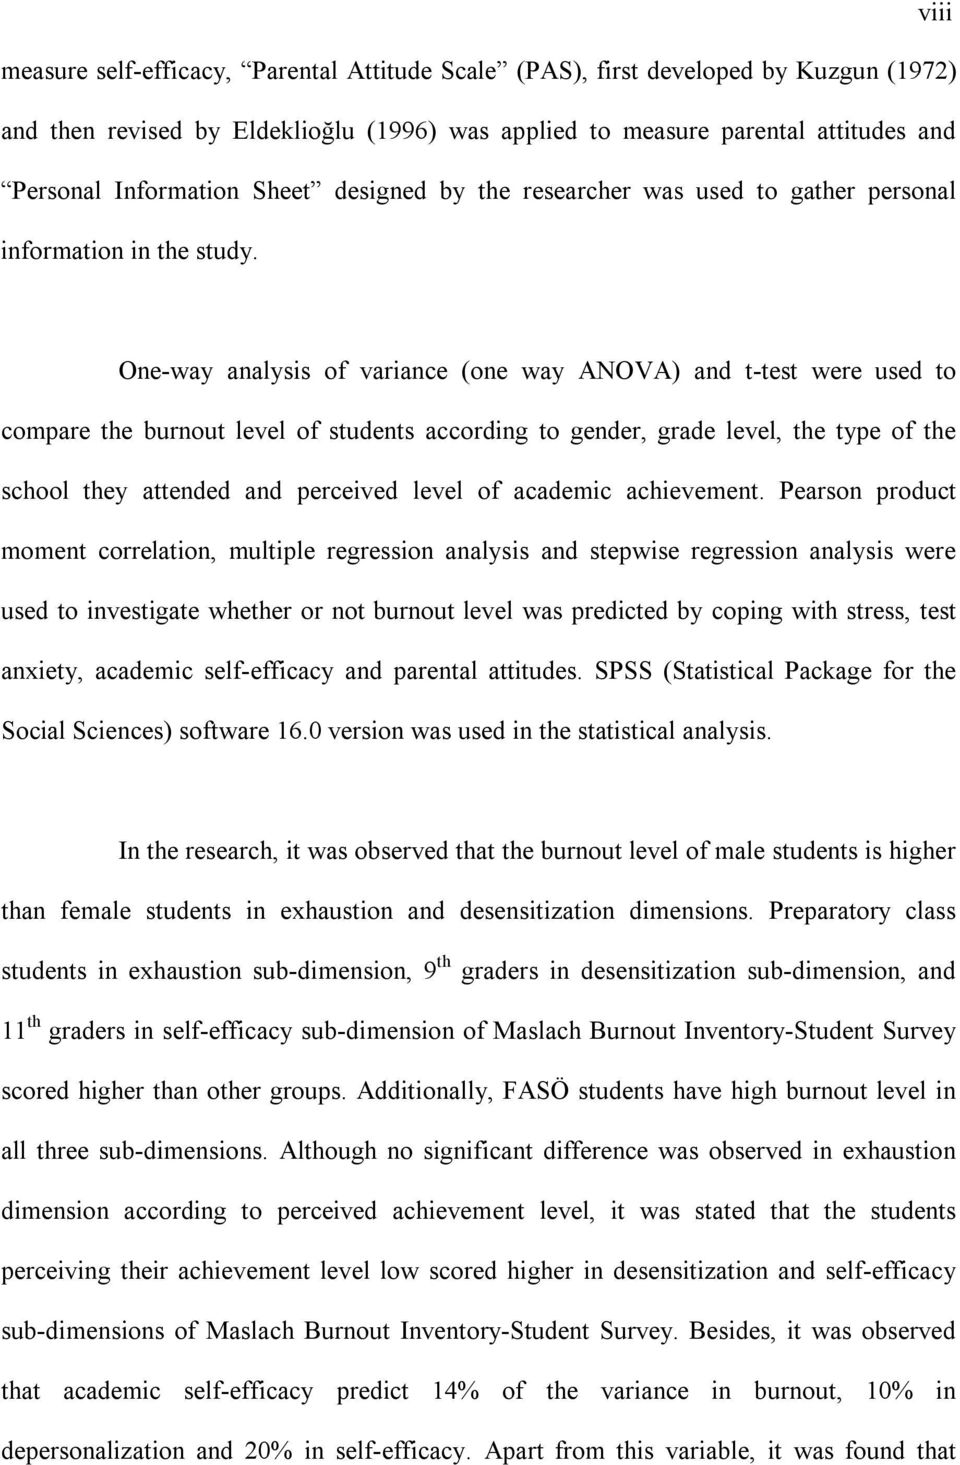 One-way analysis of variance (one way ANOVA) and t-test were used to compare the burnout level of students according to gender, grade level, the type of the school they attended and perceived level